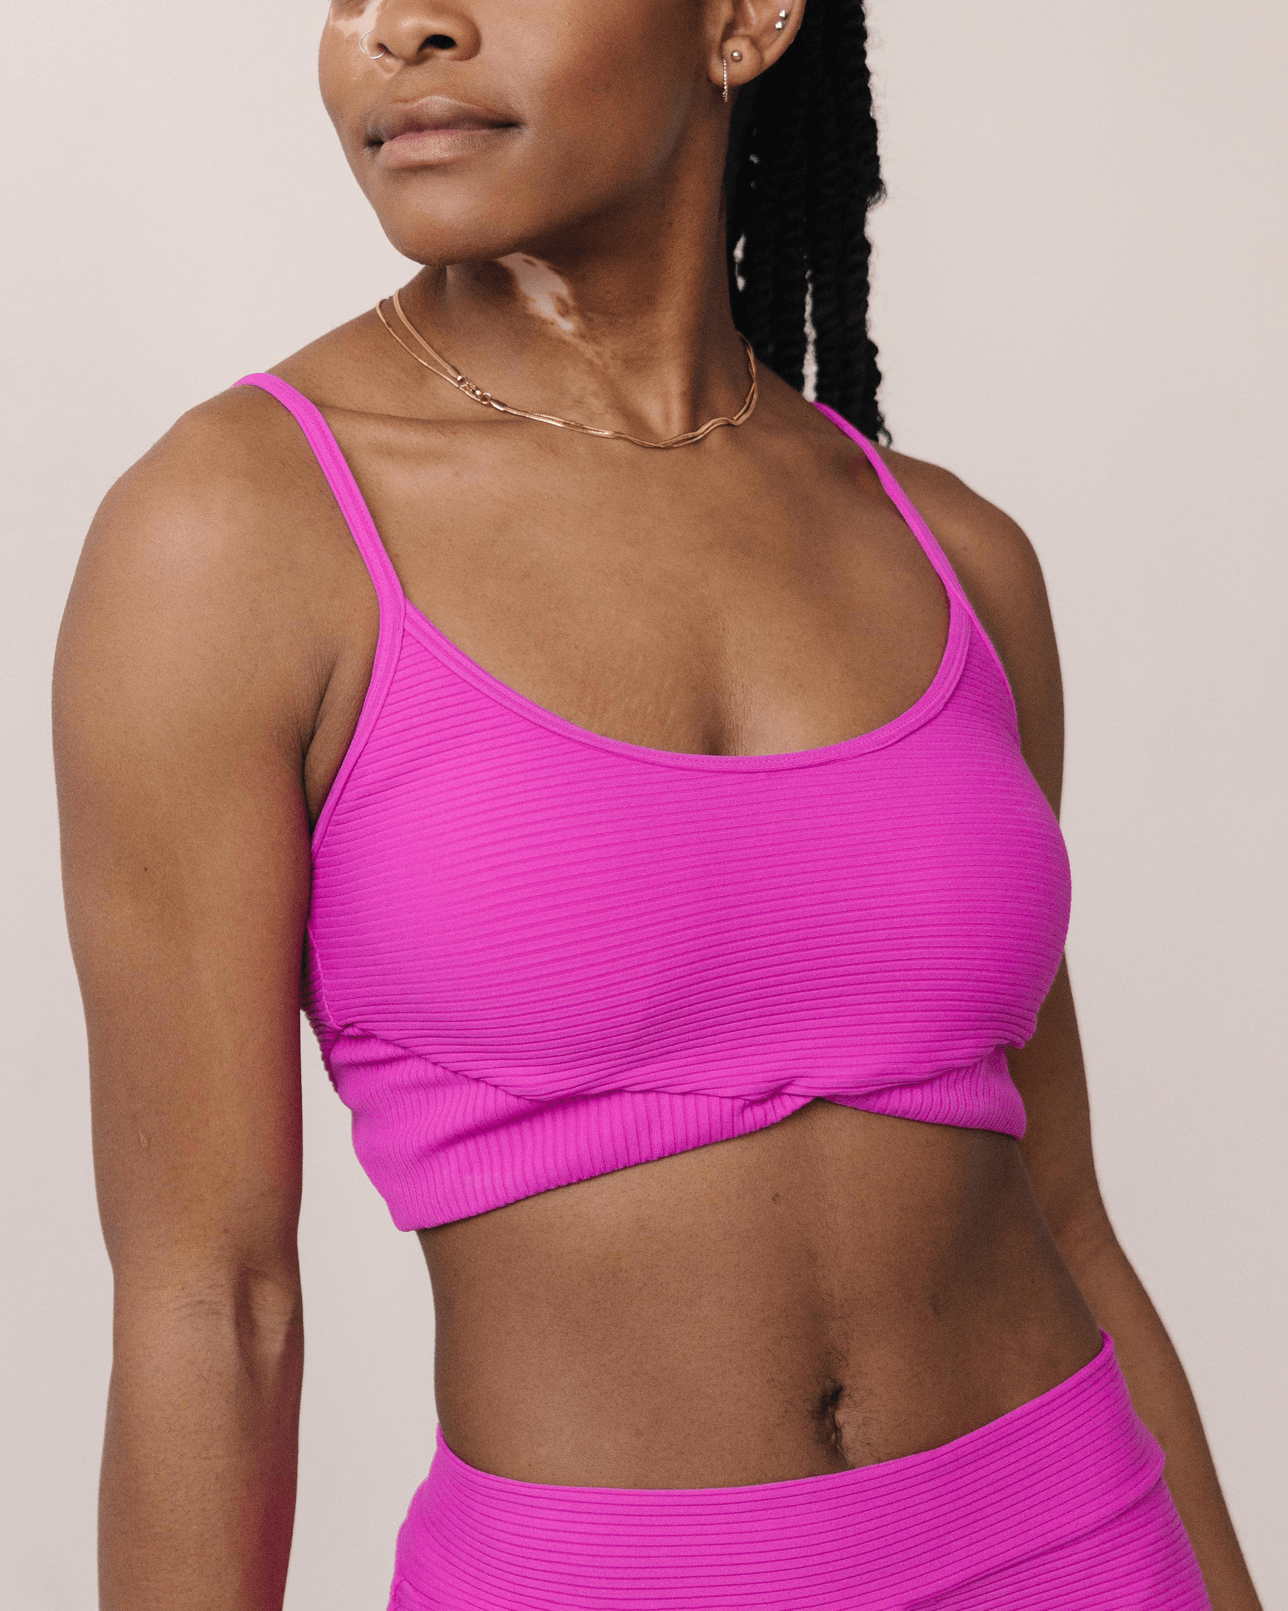 The racerback sports bra tanline is a classic >>>